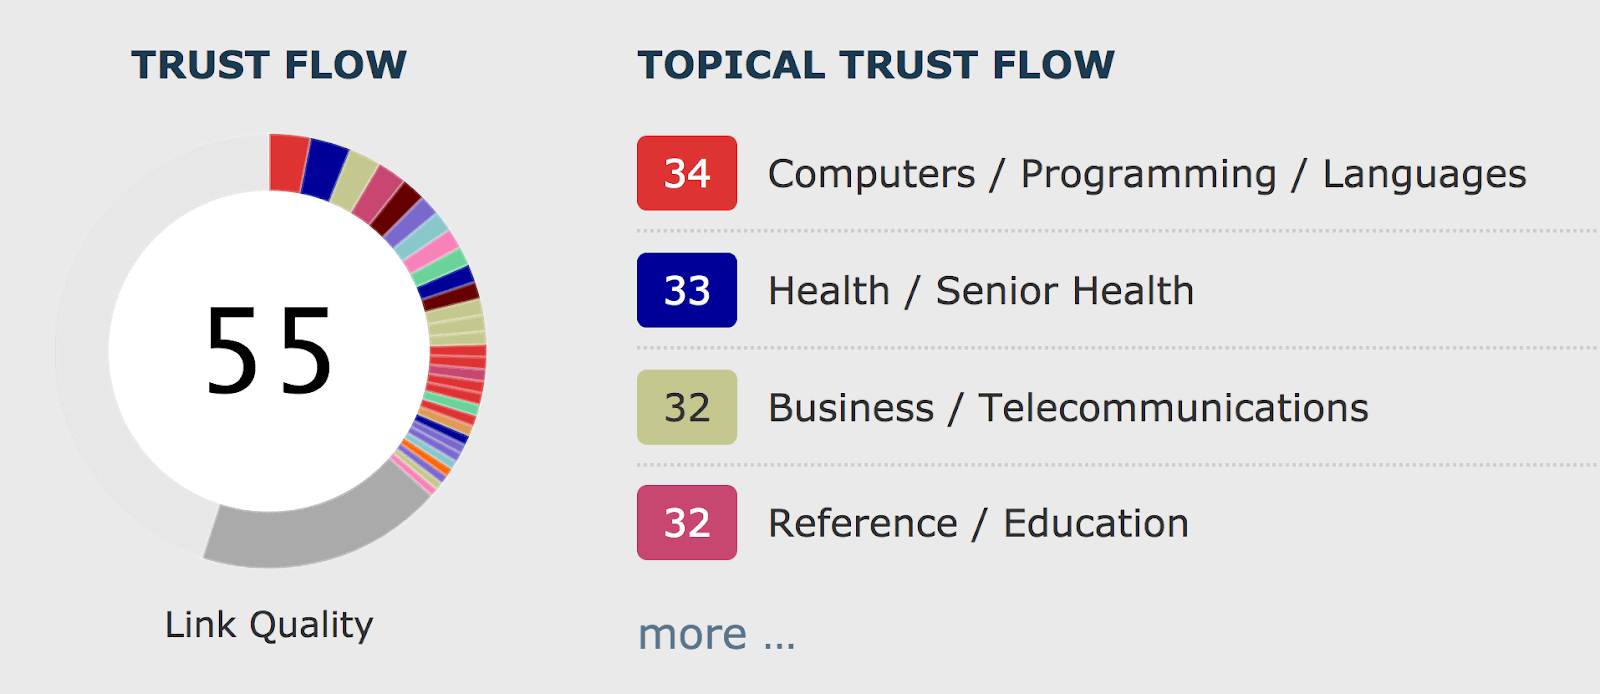 Topical trust flow